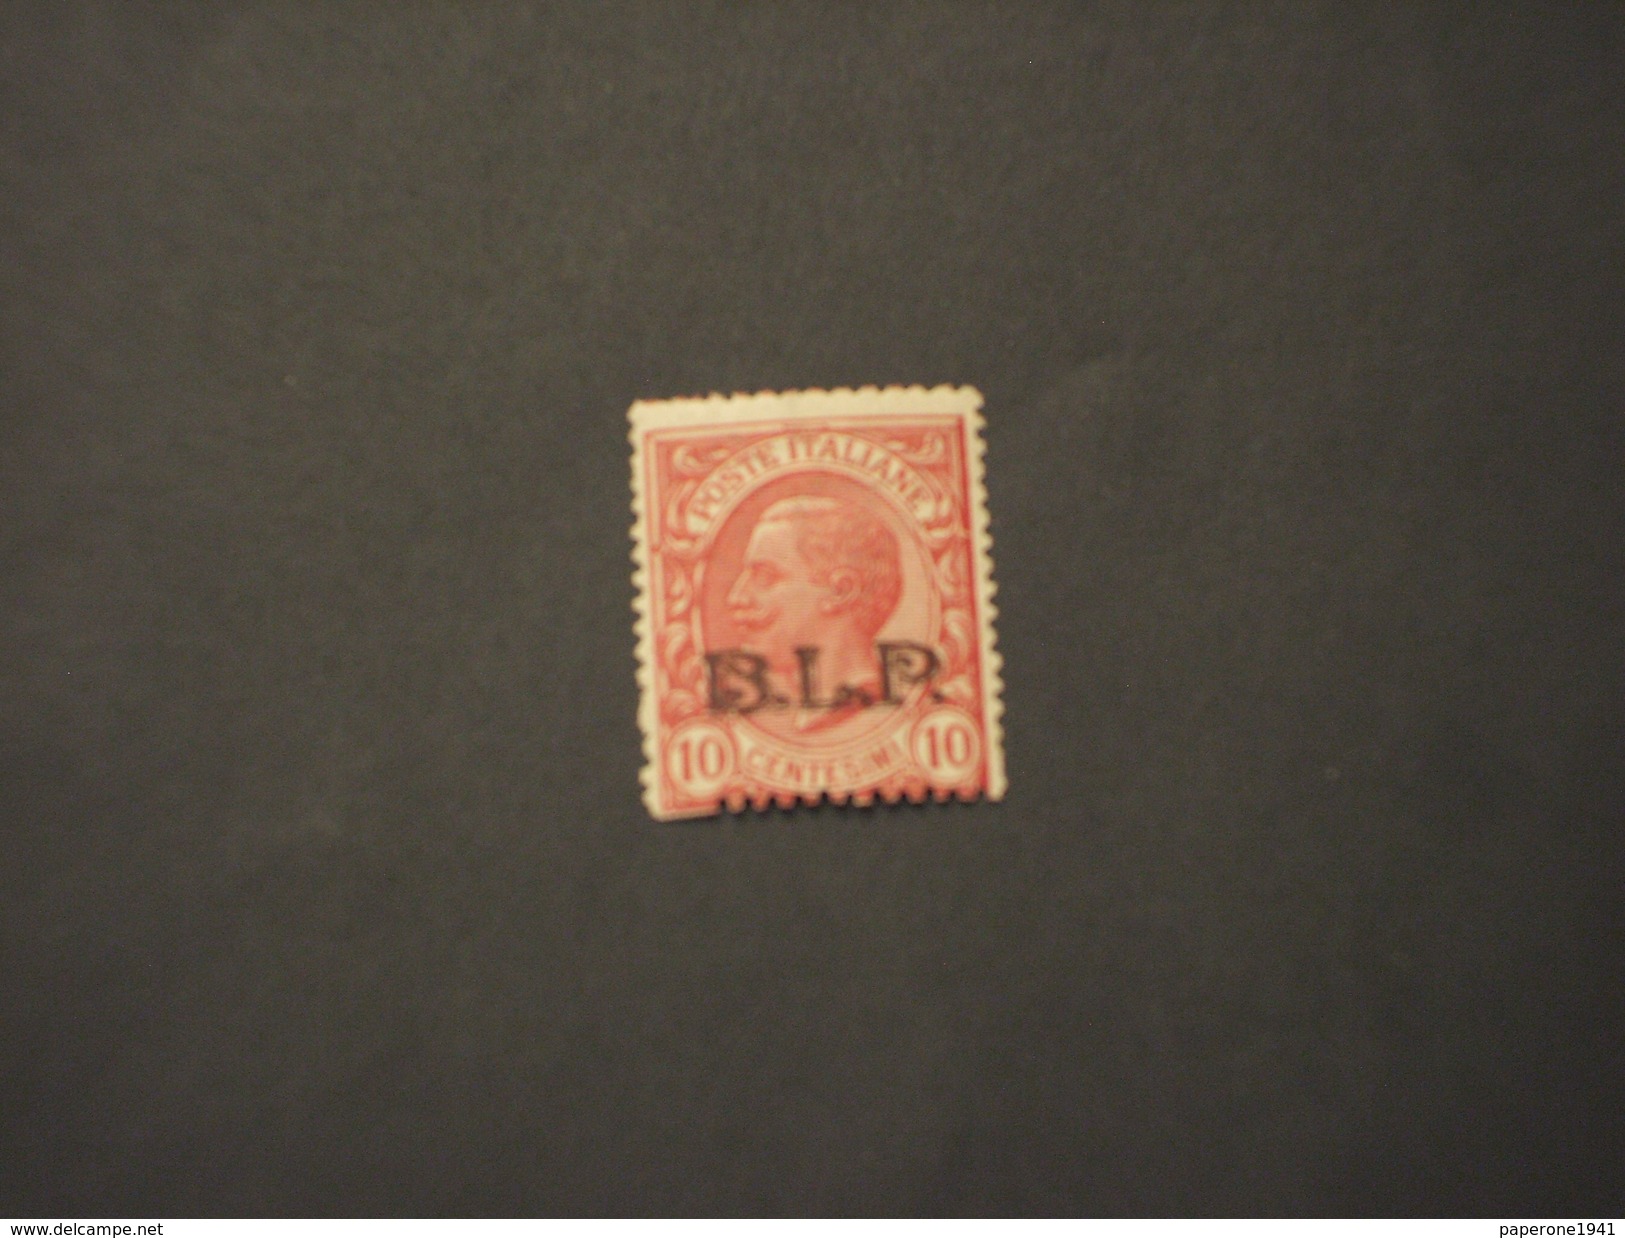 ITALIA REGNO - B.L.P. - 1922/3 RE 10 C. - NUOVO(++) - Stamps For Advertising Covers (BLP)